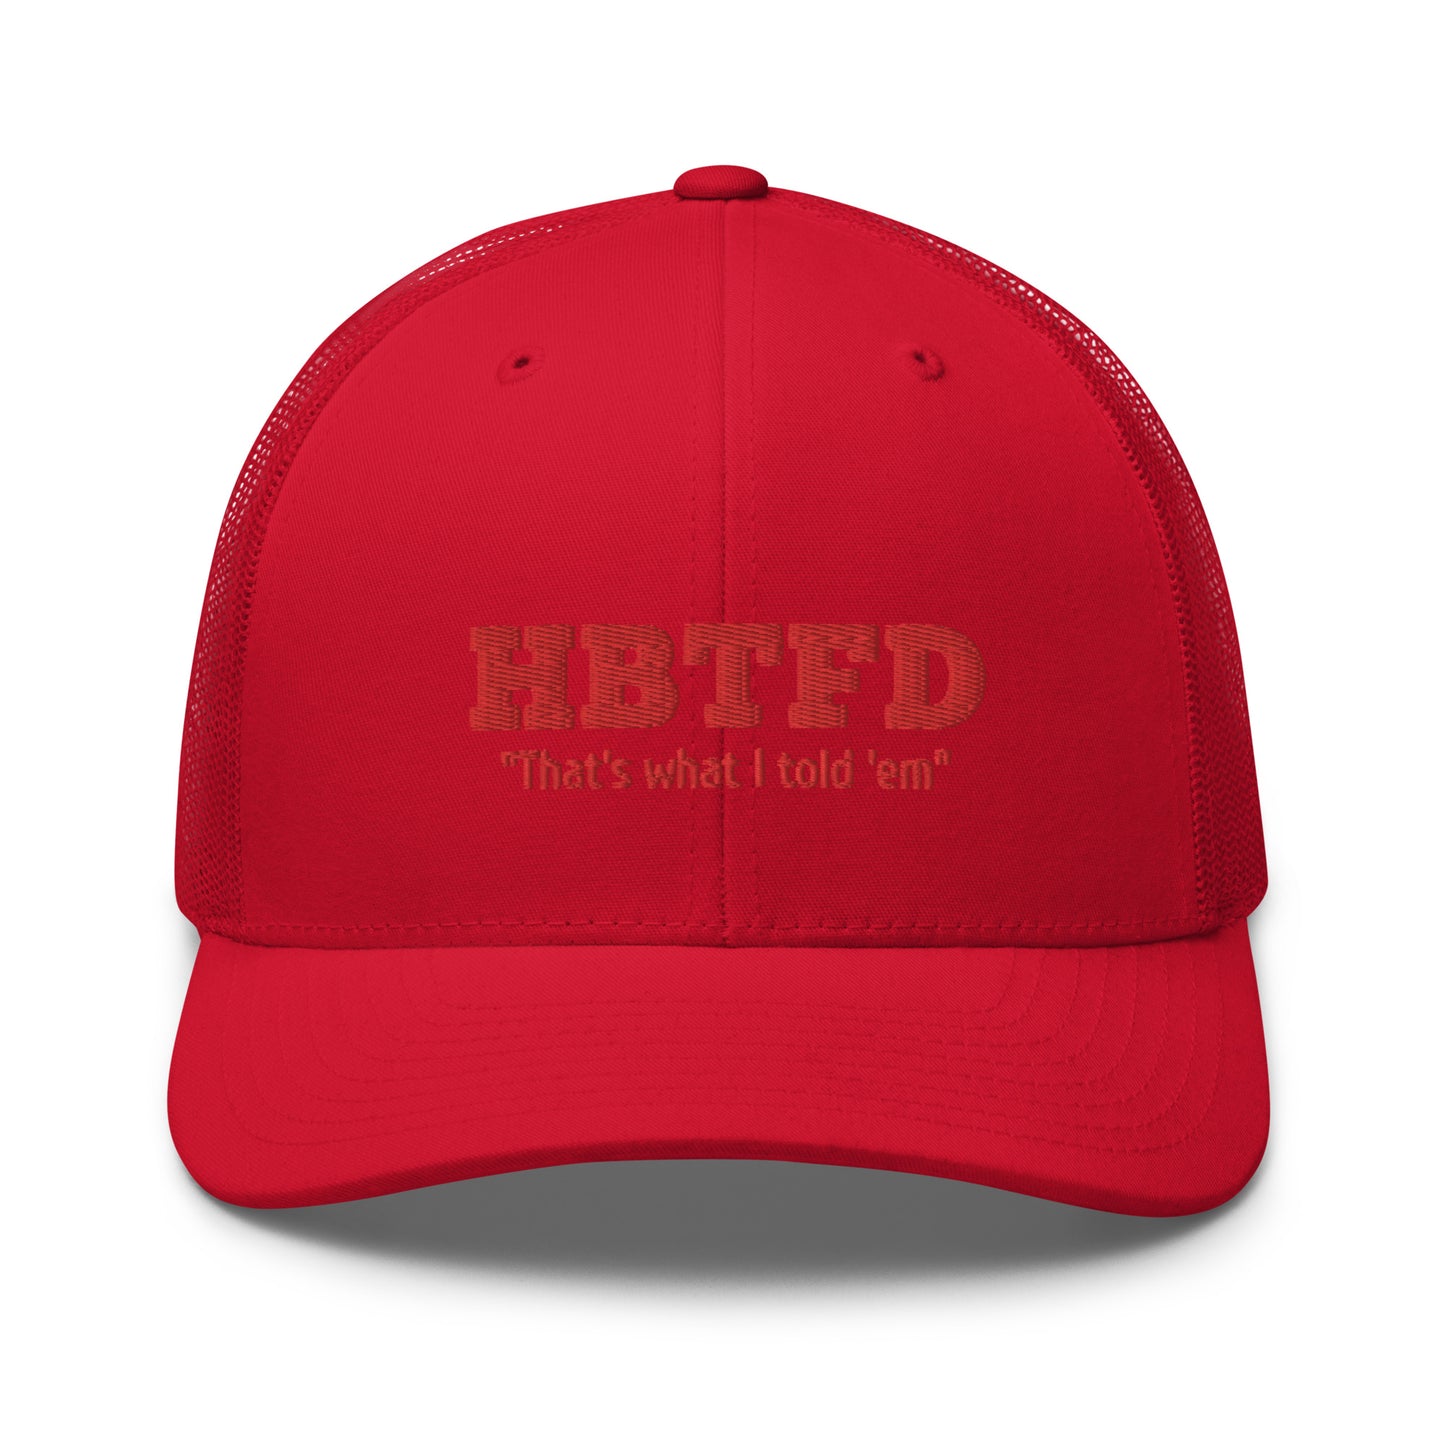 That’s what I told them! / HBTFD Hat / HBTFD Trucker Cap